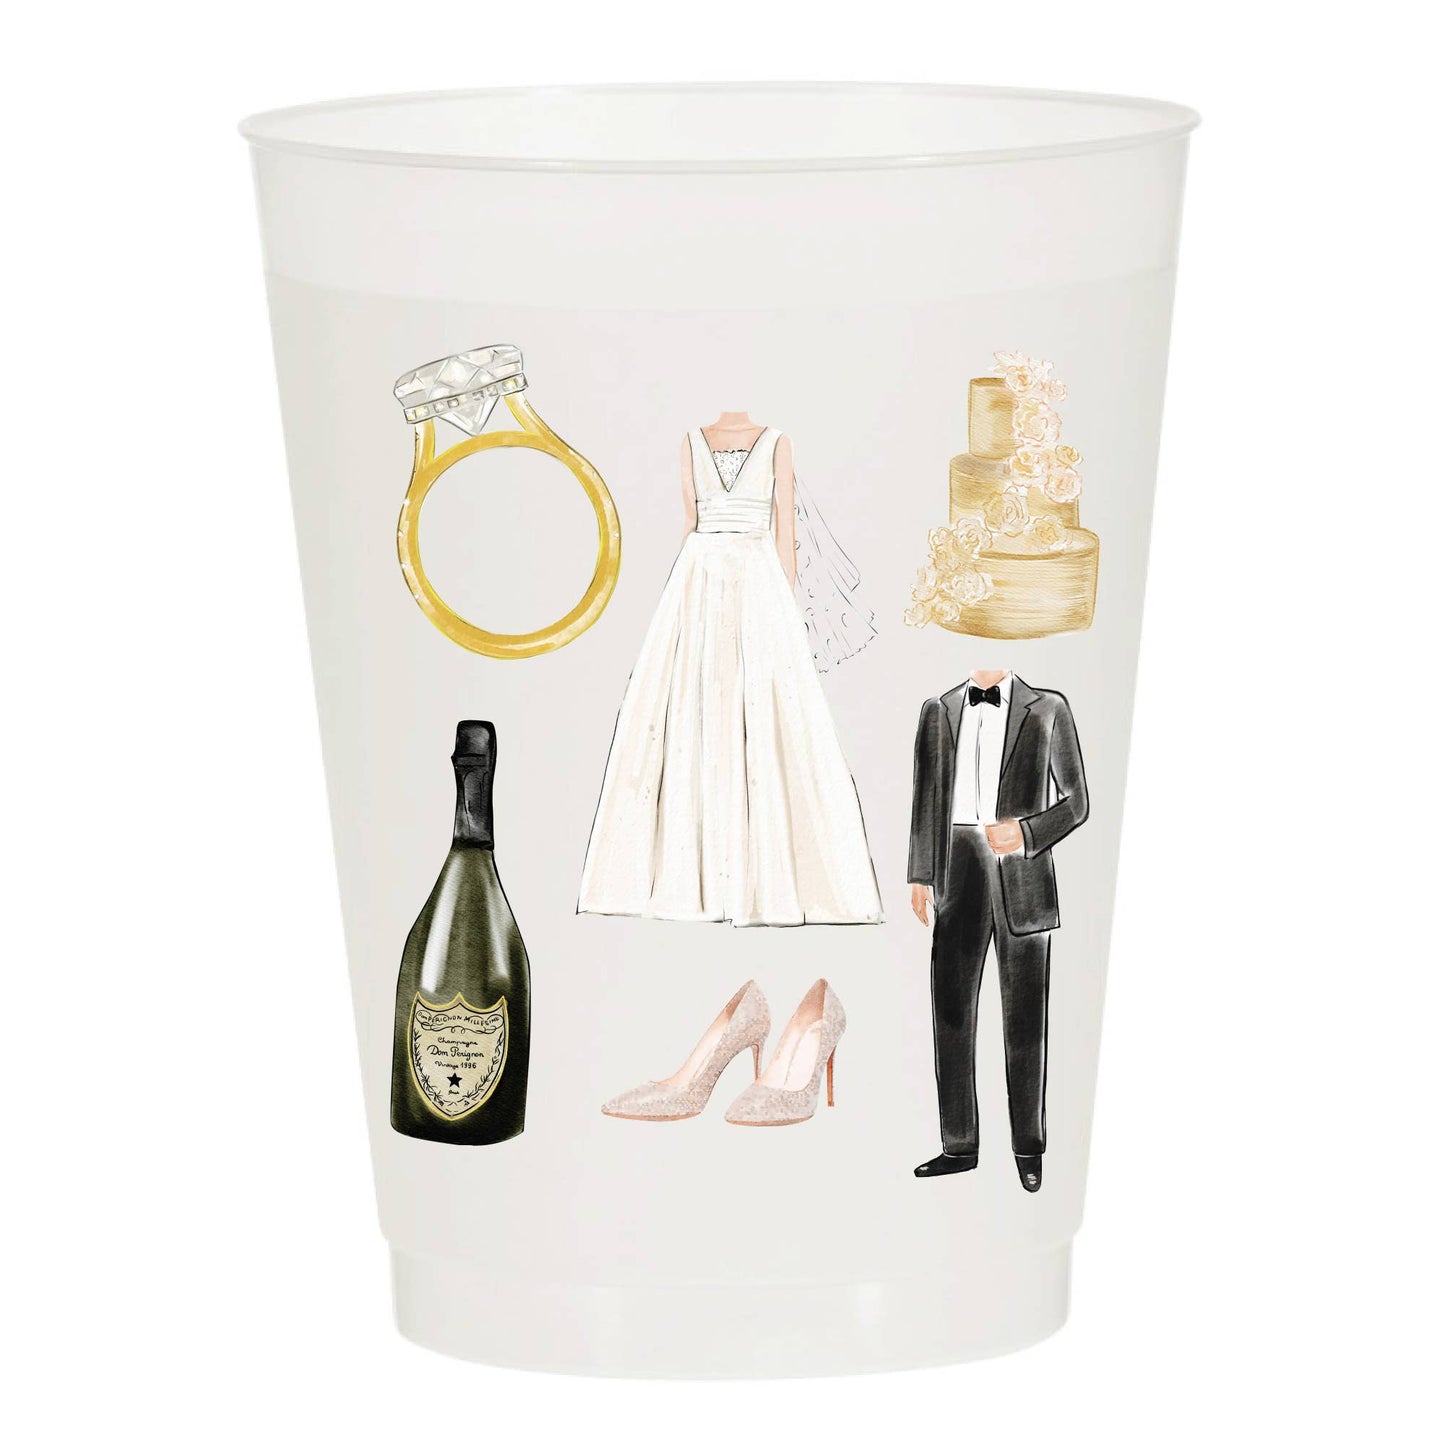 Wedding Collage Dress Tux Cake Ring Champagne -Set of 10 Cup